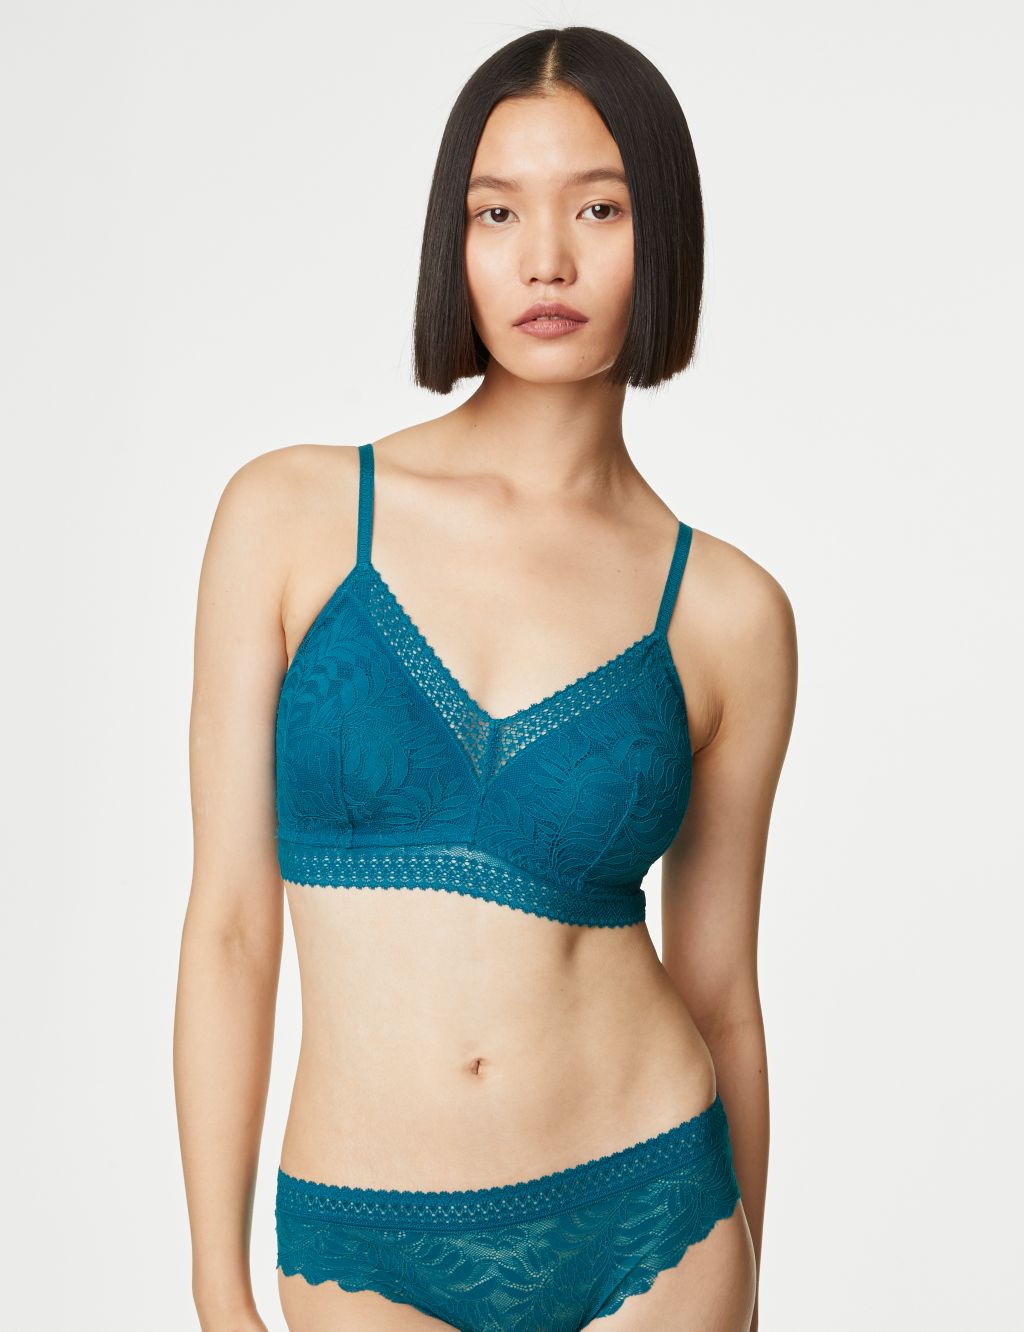 Flexifit™ Lace Non Wired Bralette image 3